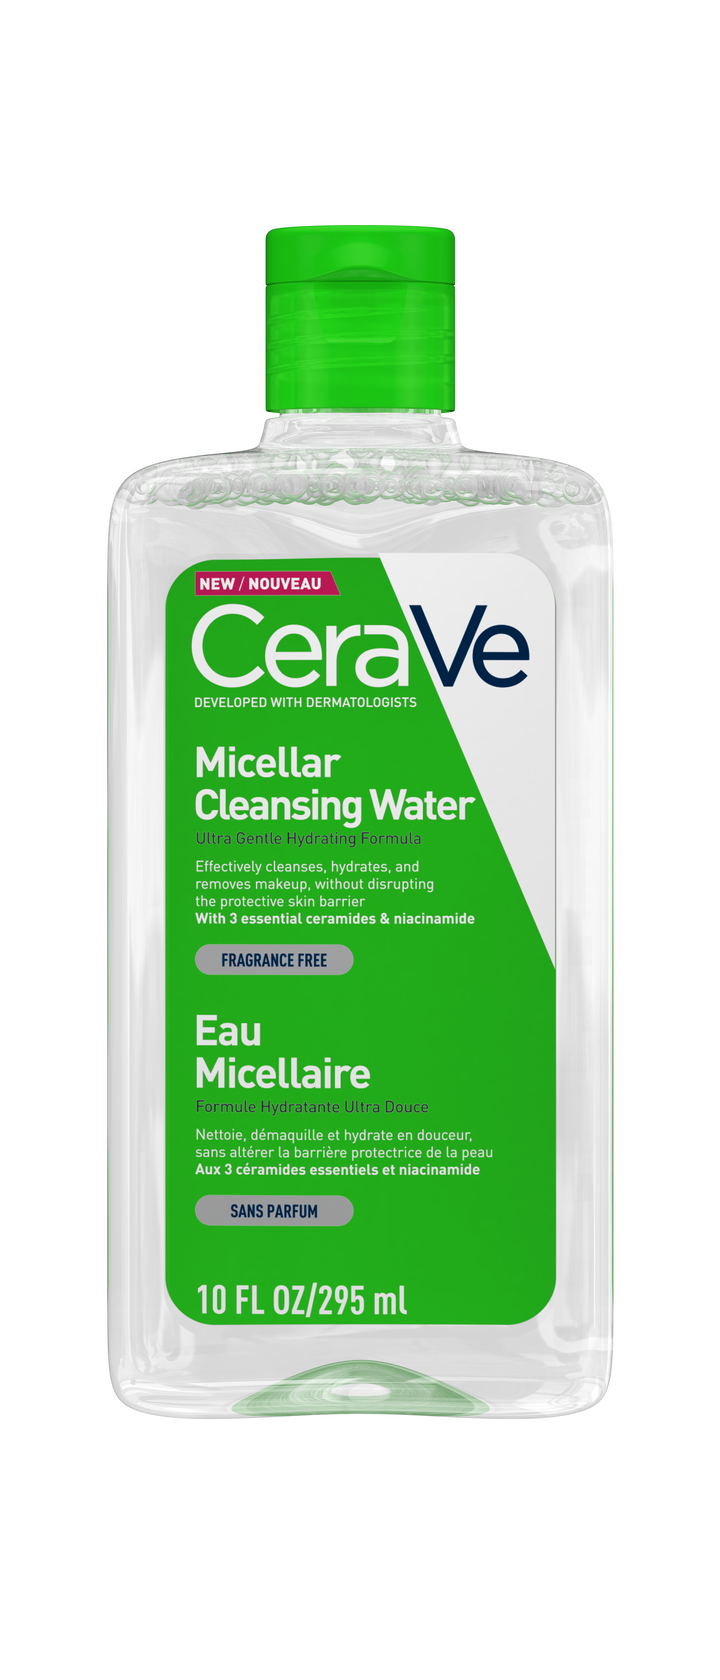 CeraVe Hydrating Micellar Cleansing Water flacon - CeraVe - Huidproducten.nl